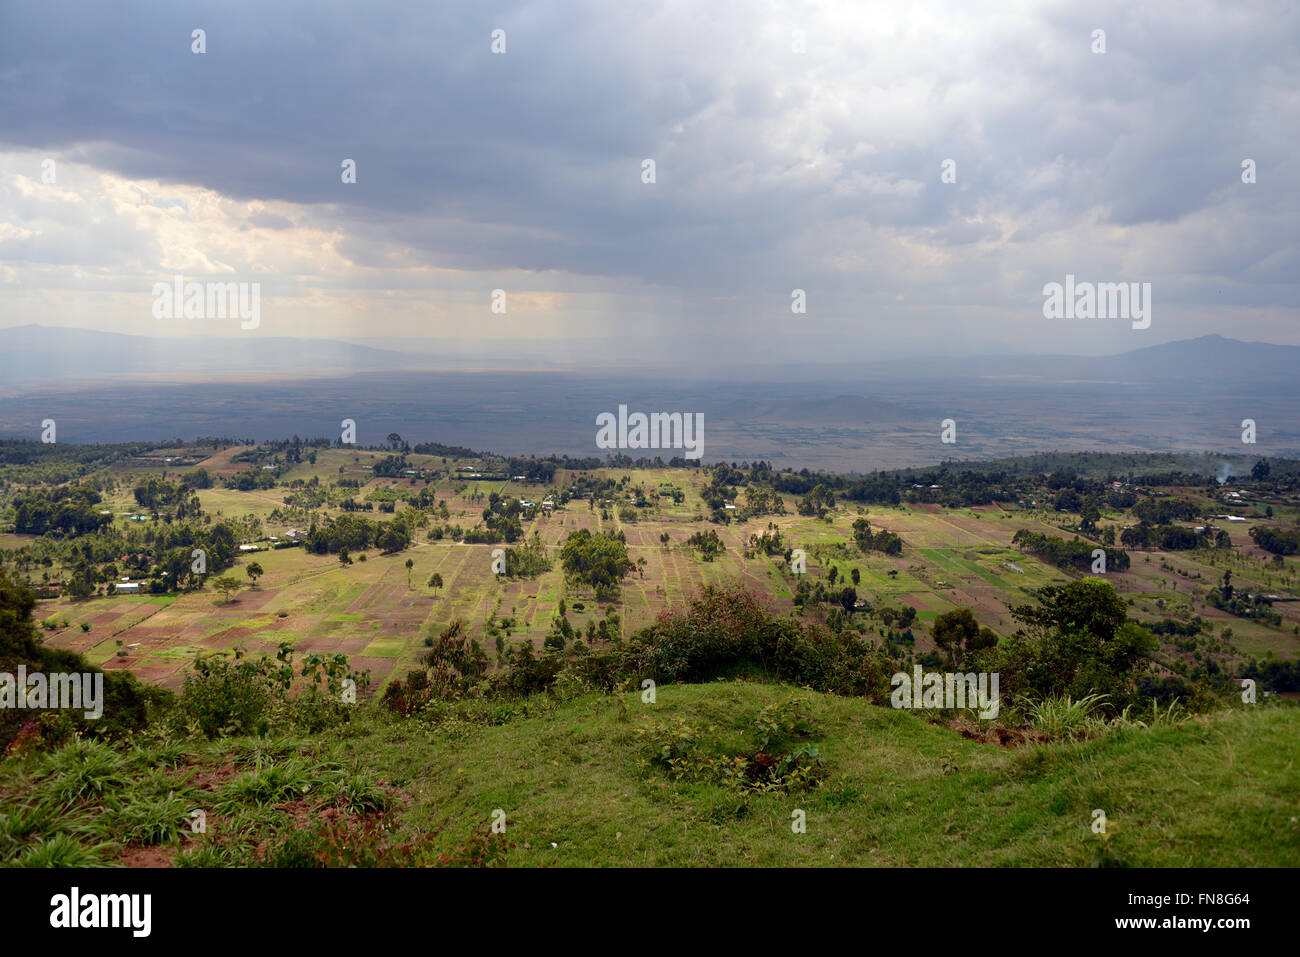 Africa: Kenya: The East African Rift Valley looking North West from Limuru over the farmed terraces towards the Ngong Hills and Naivasha Stock Photo